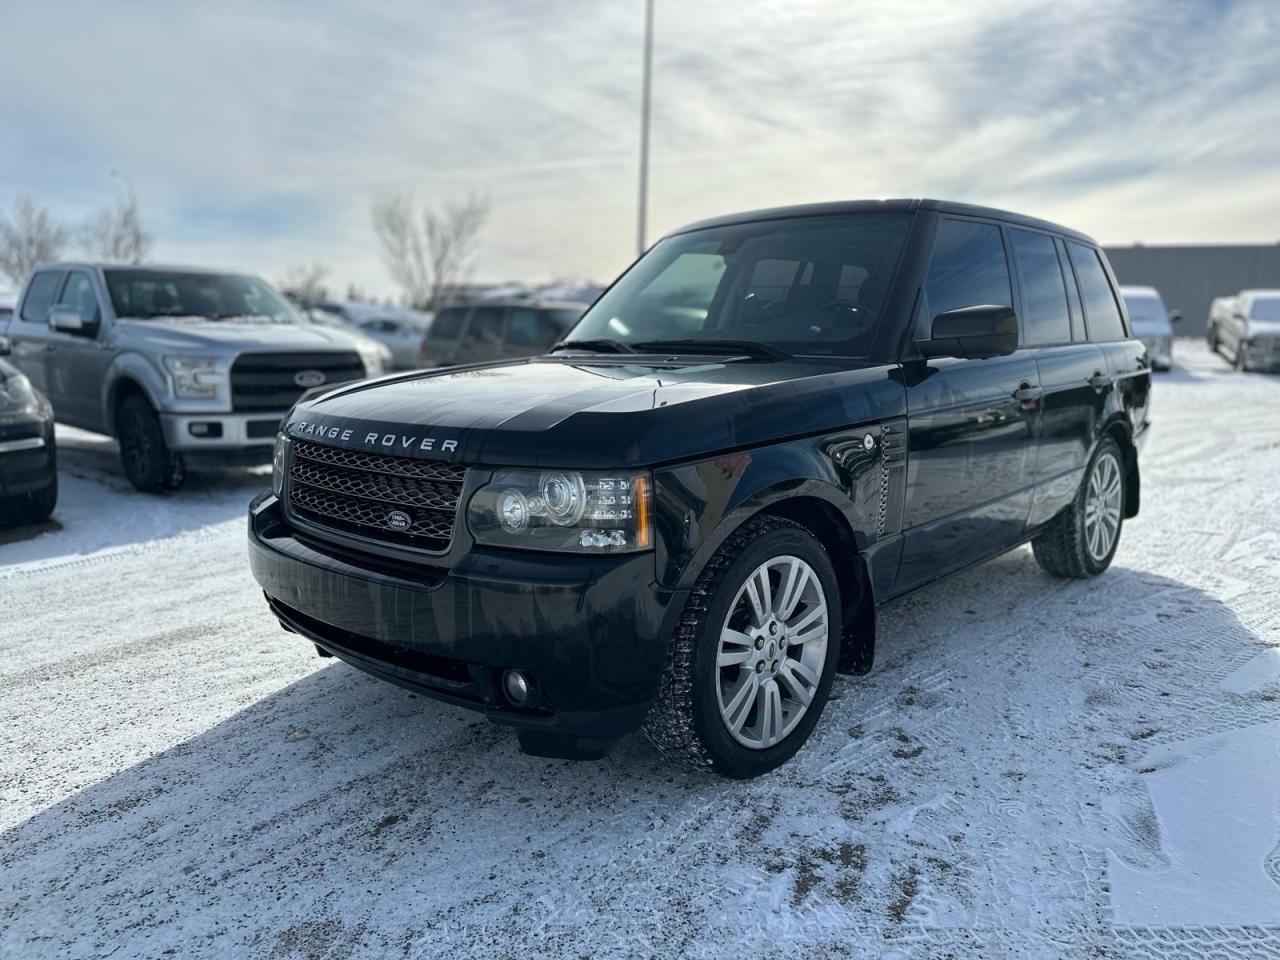 2011 Land Rover Range Rover HSE LUXURY | LEATHER | HEATED STEERING | $0 DOWN